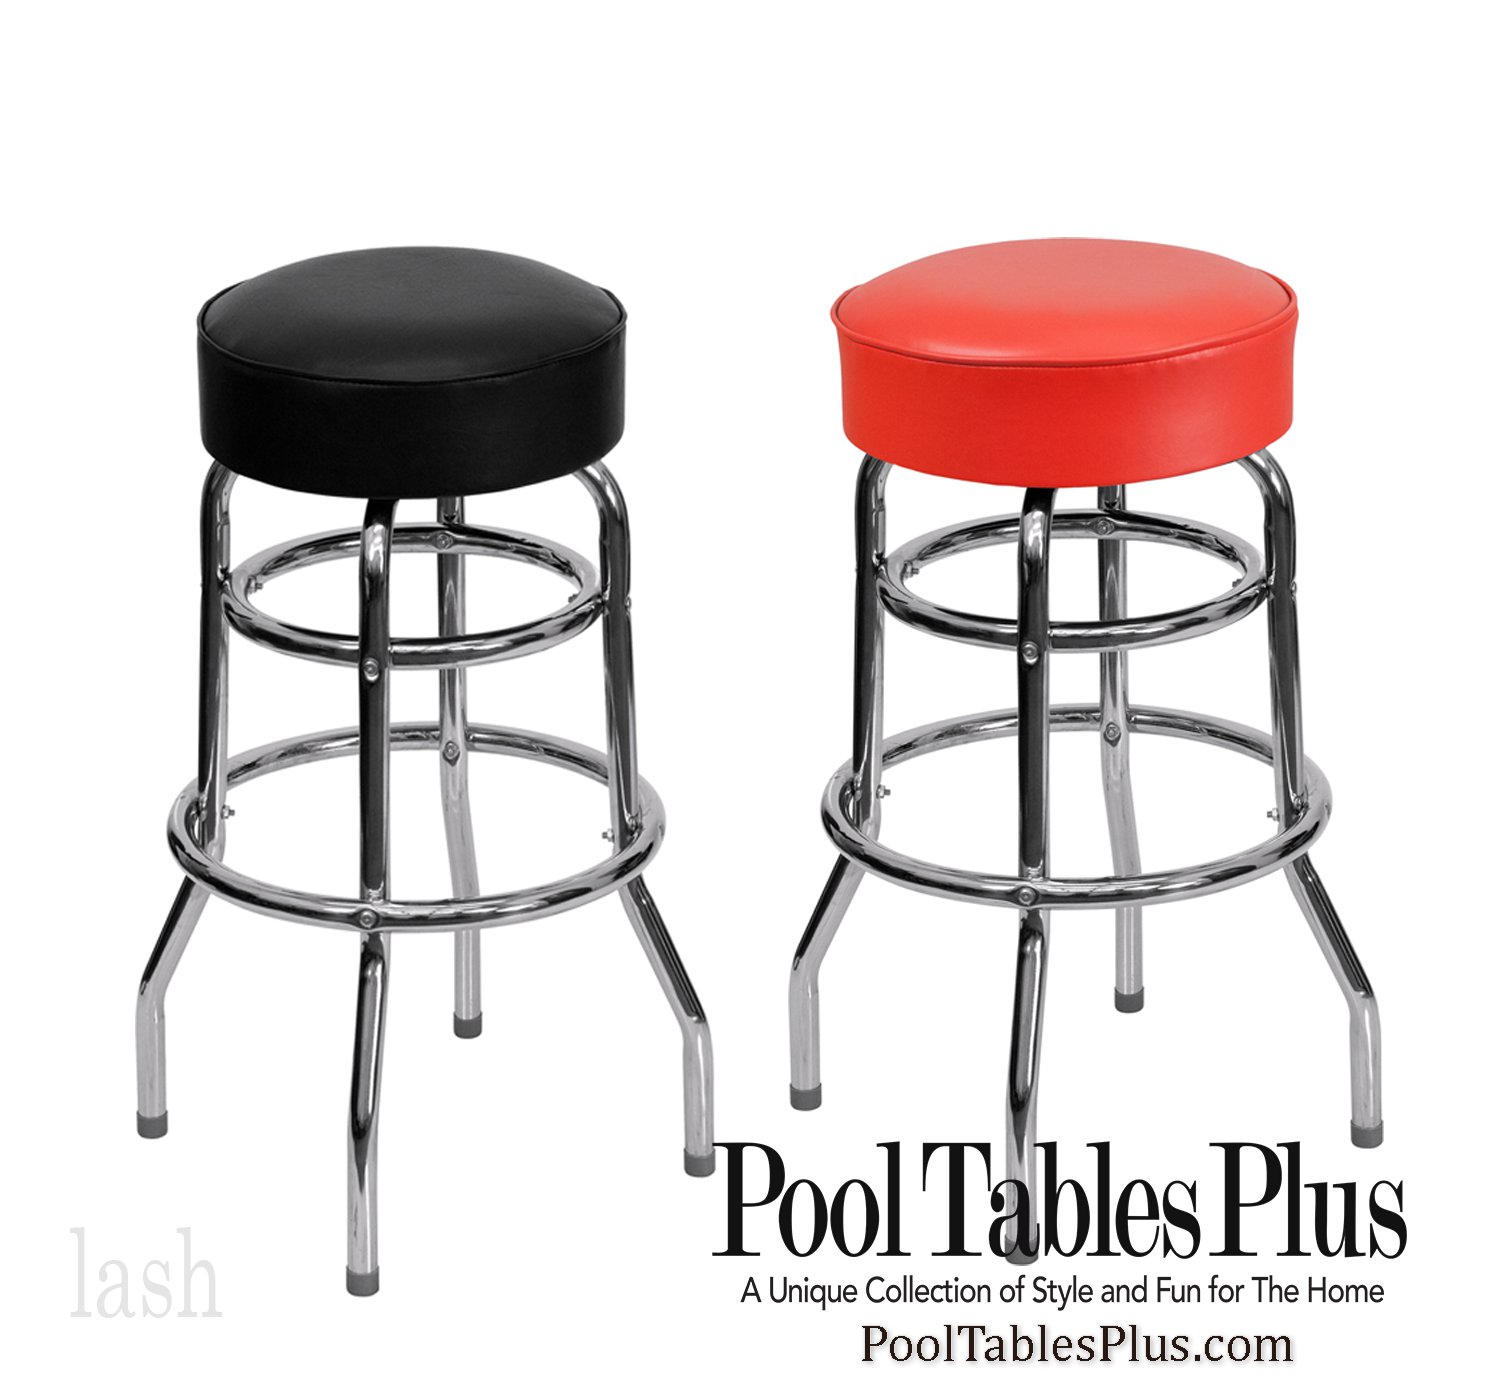 Double Ring Swivel Bar Stool, Pool Bar Stools And Table